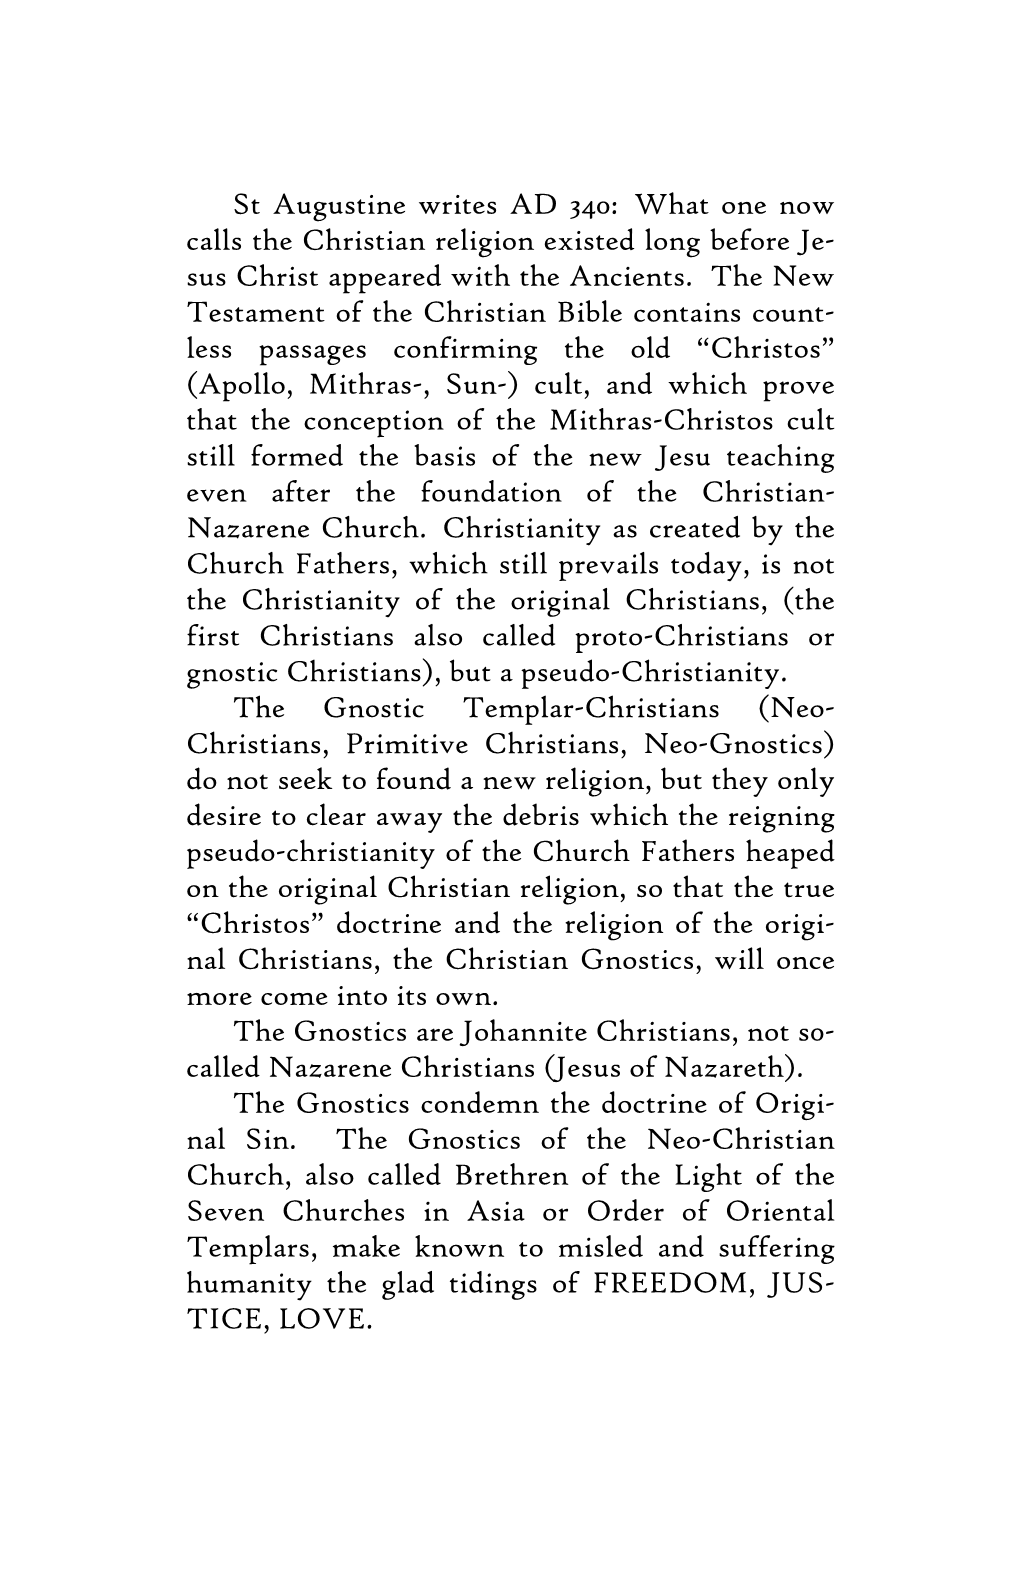 St Augustine Writes AD 340: What One Now Calls the Christian Religion Existed Long Before Je- Sus Christ Appeared with the Ancients